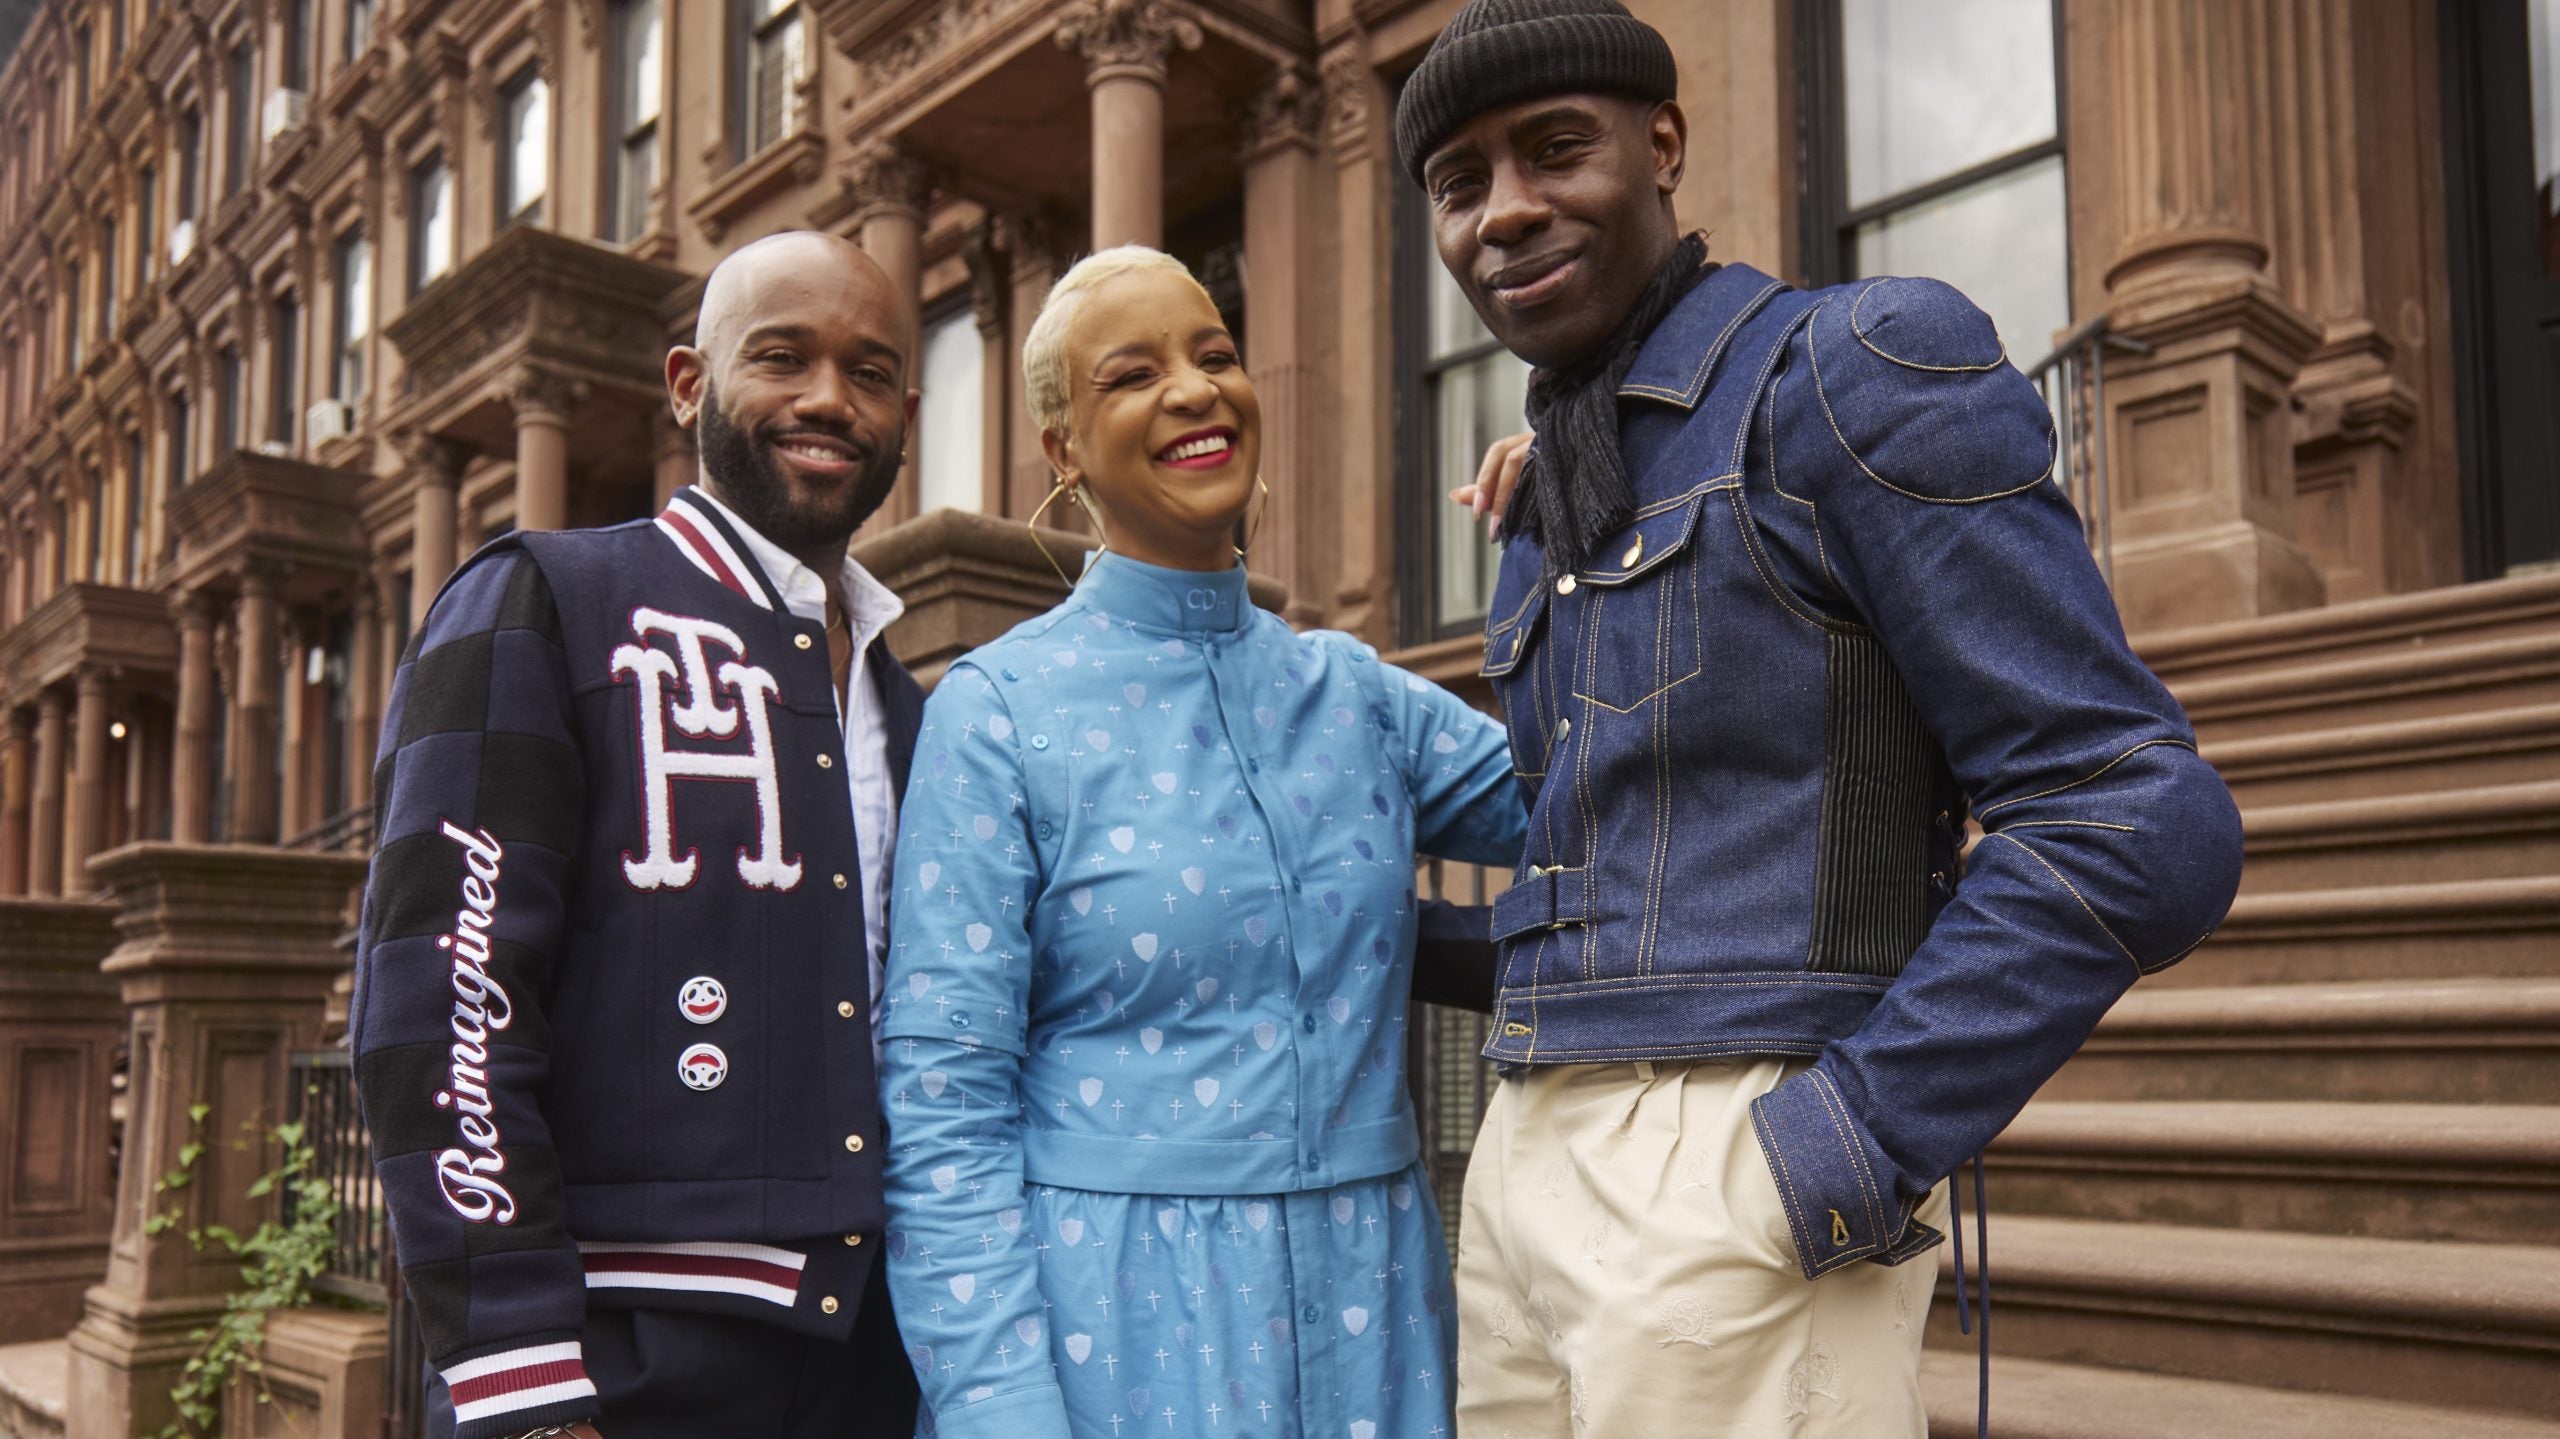 Tommy Hilfiger’s Partners With Harlem Fashion Row To Highlight BIPOC Designers